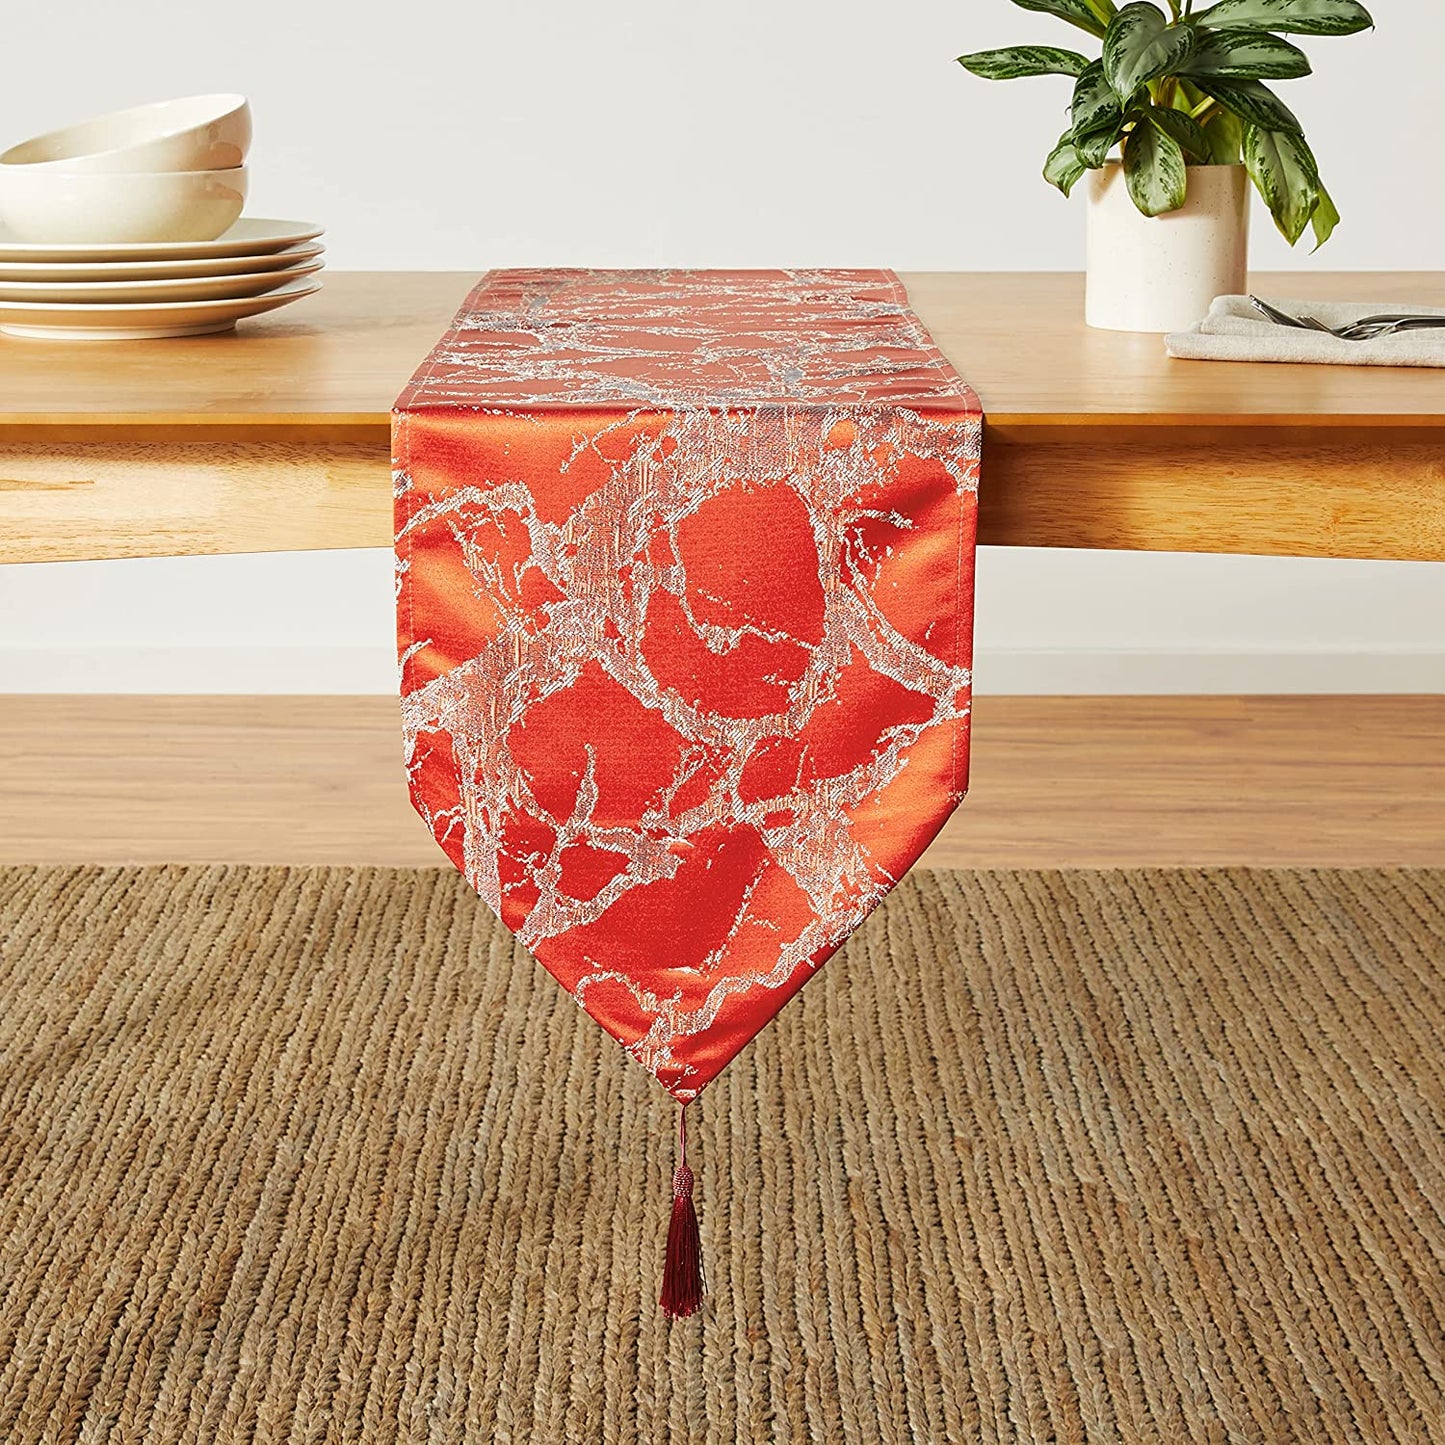 Cordova Abstract Marble Pattern Decorative Table Runner